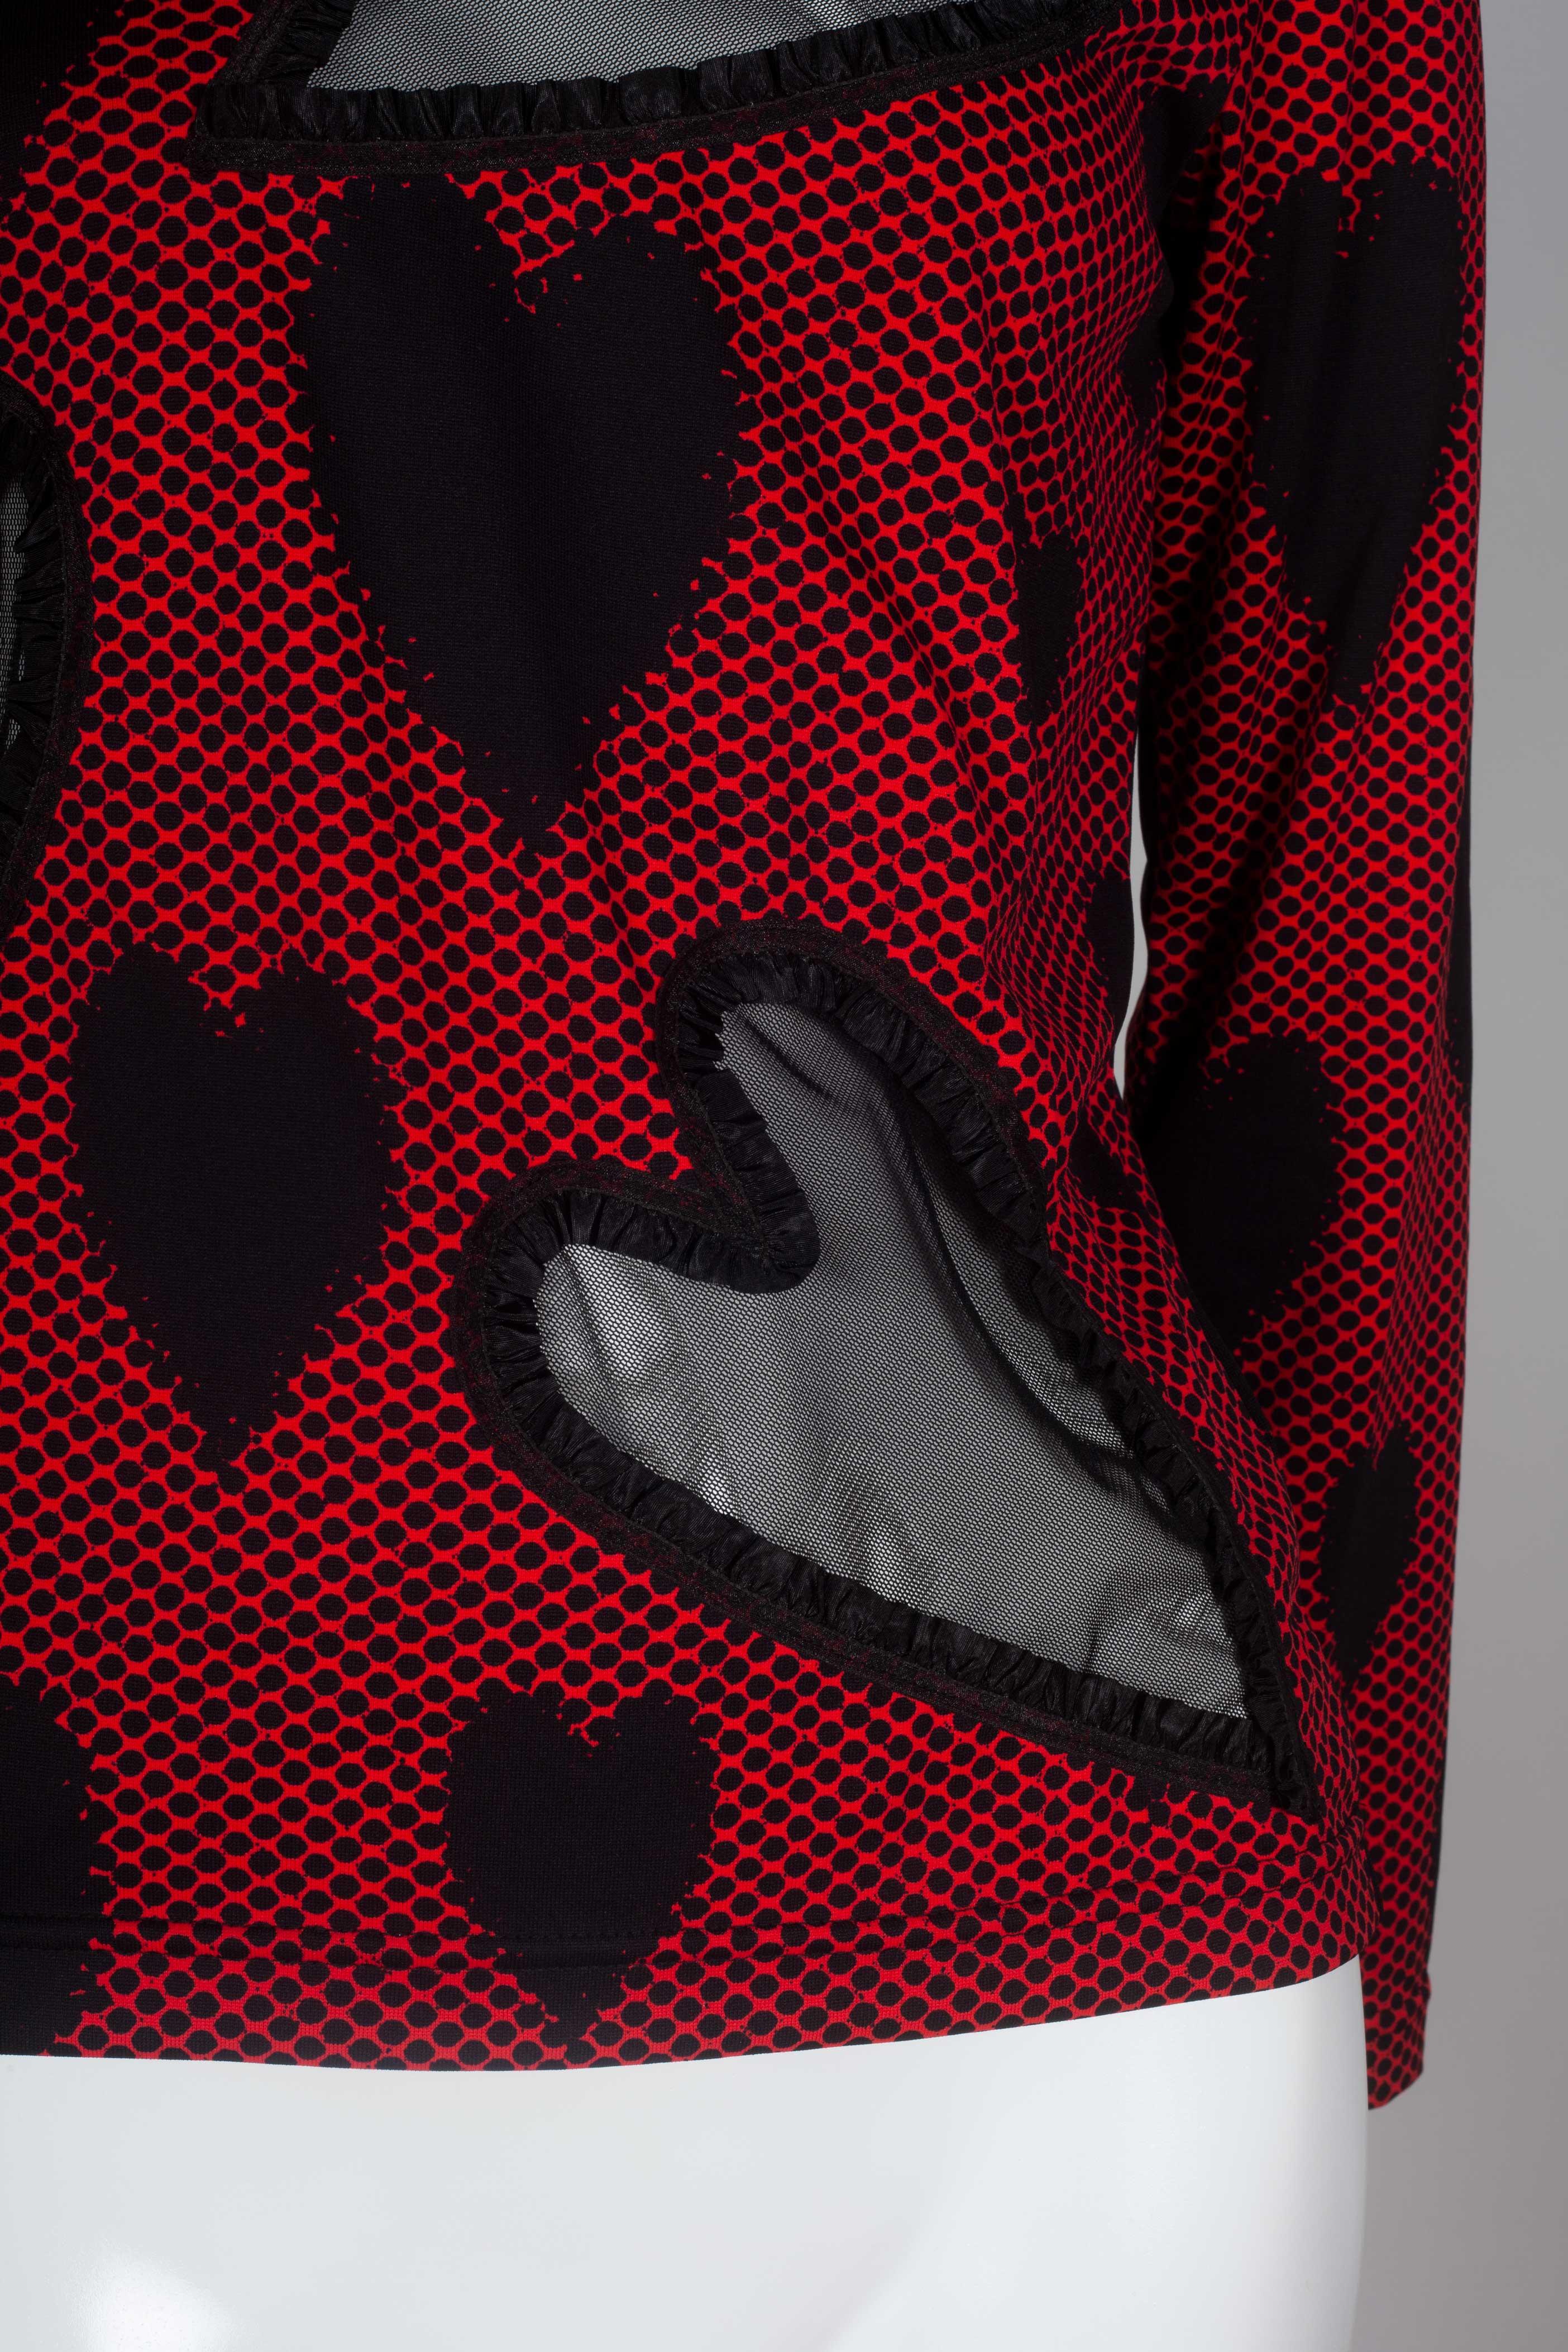 Comme des Garçons Red Long Sleeve with Chiffon Hearts, 2008 2